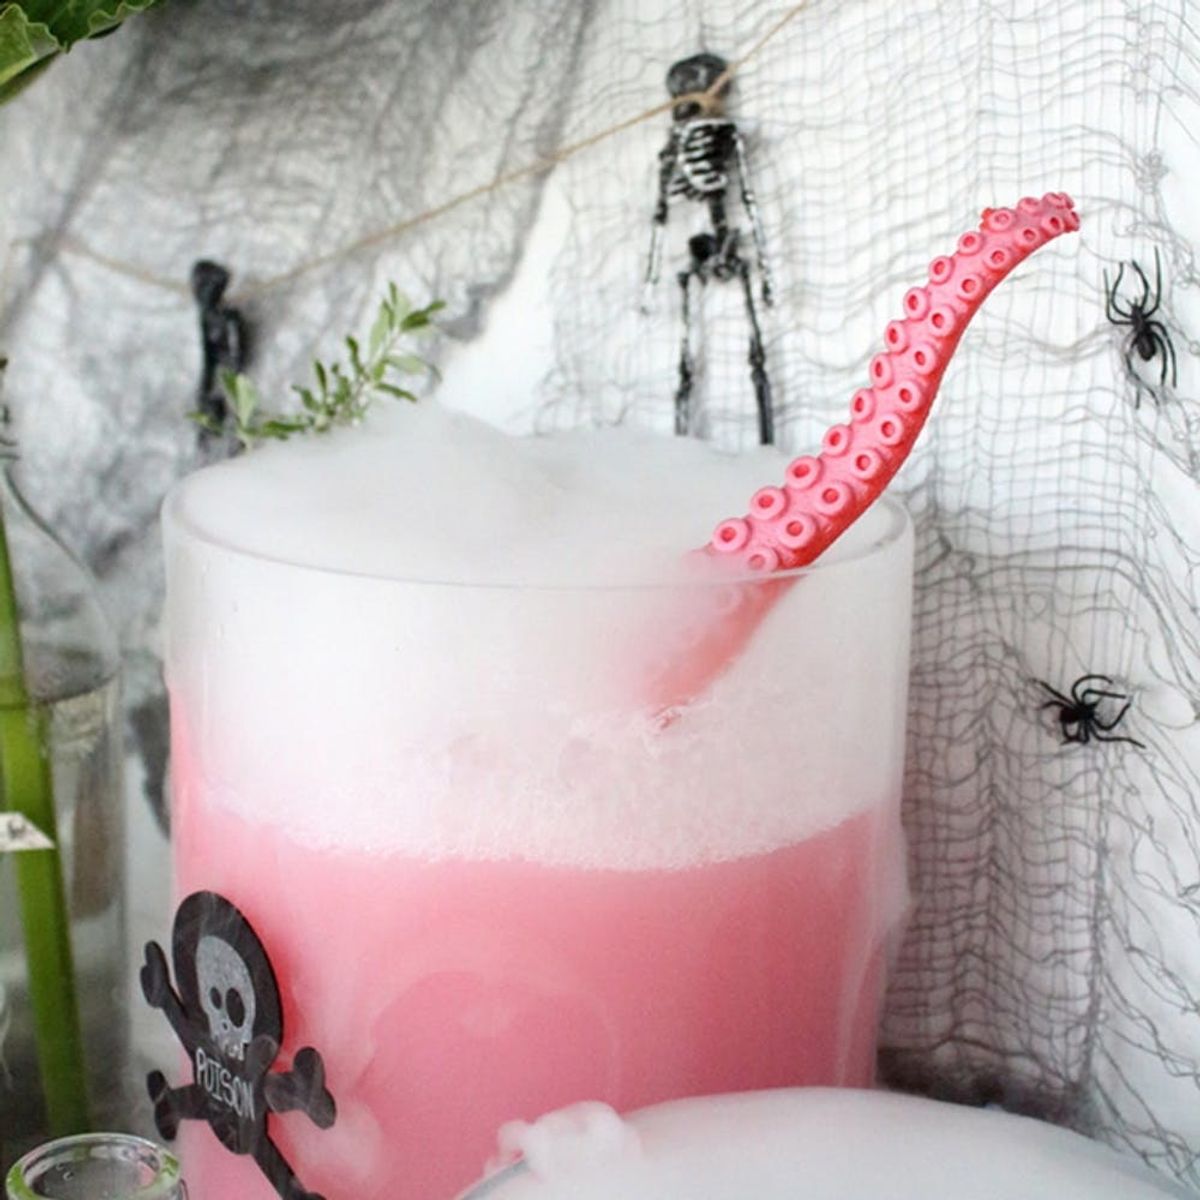 DIY Skeleton Flamingos, Marbled Candy Apples, and More Last-Minute Halloween Crafts